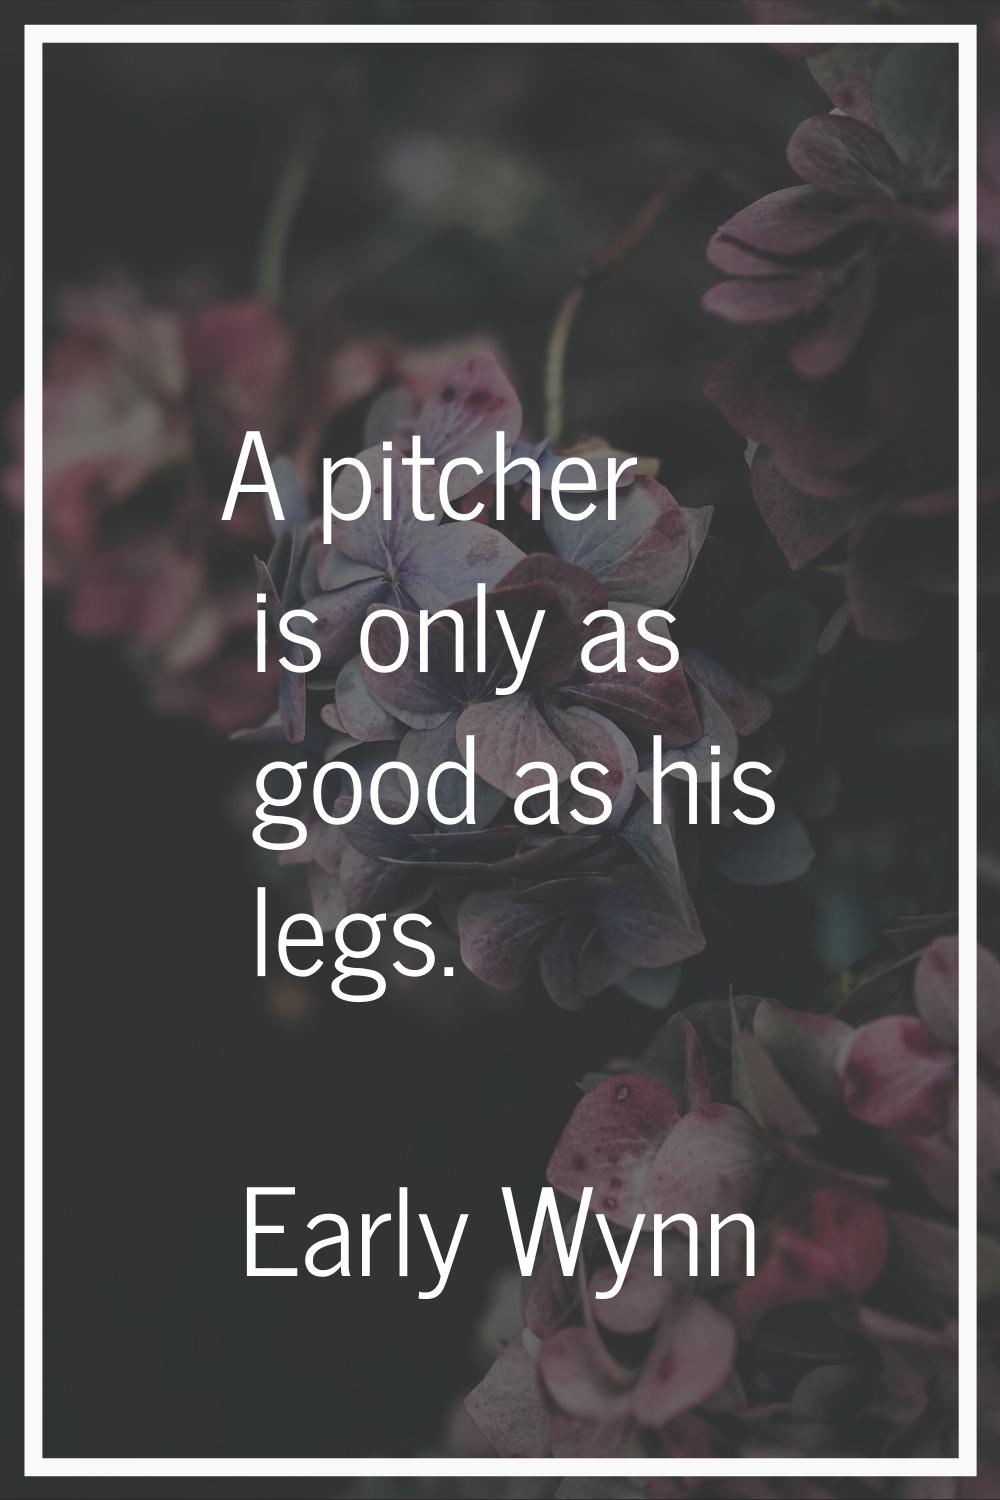 A pitcher is only as good as his legs.